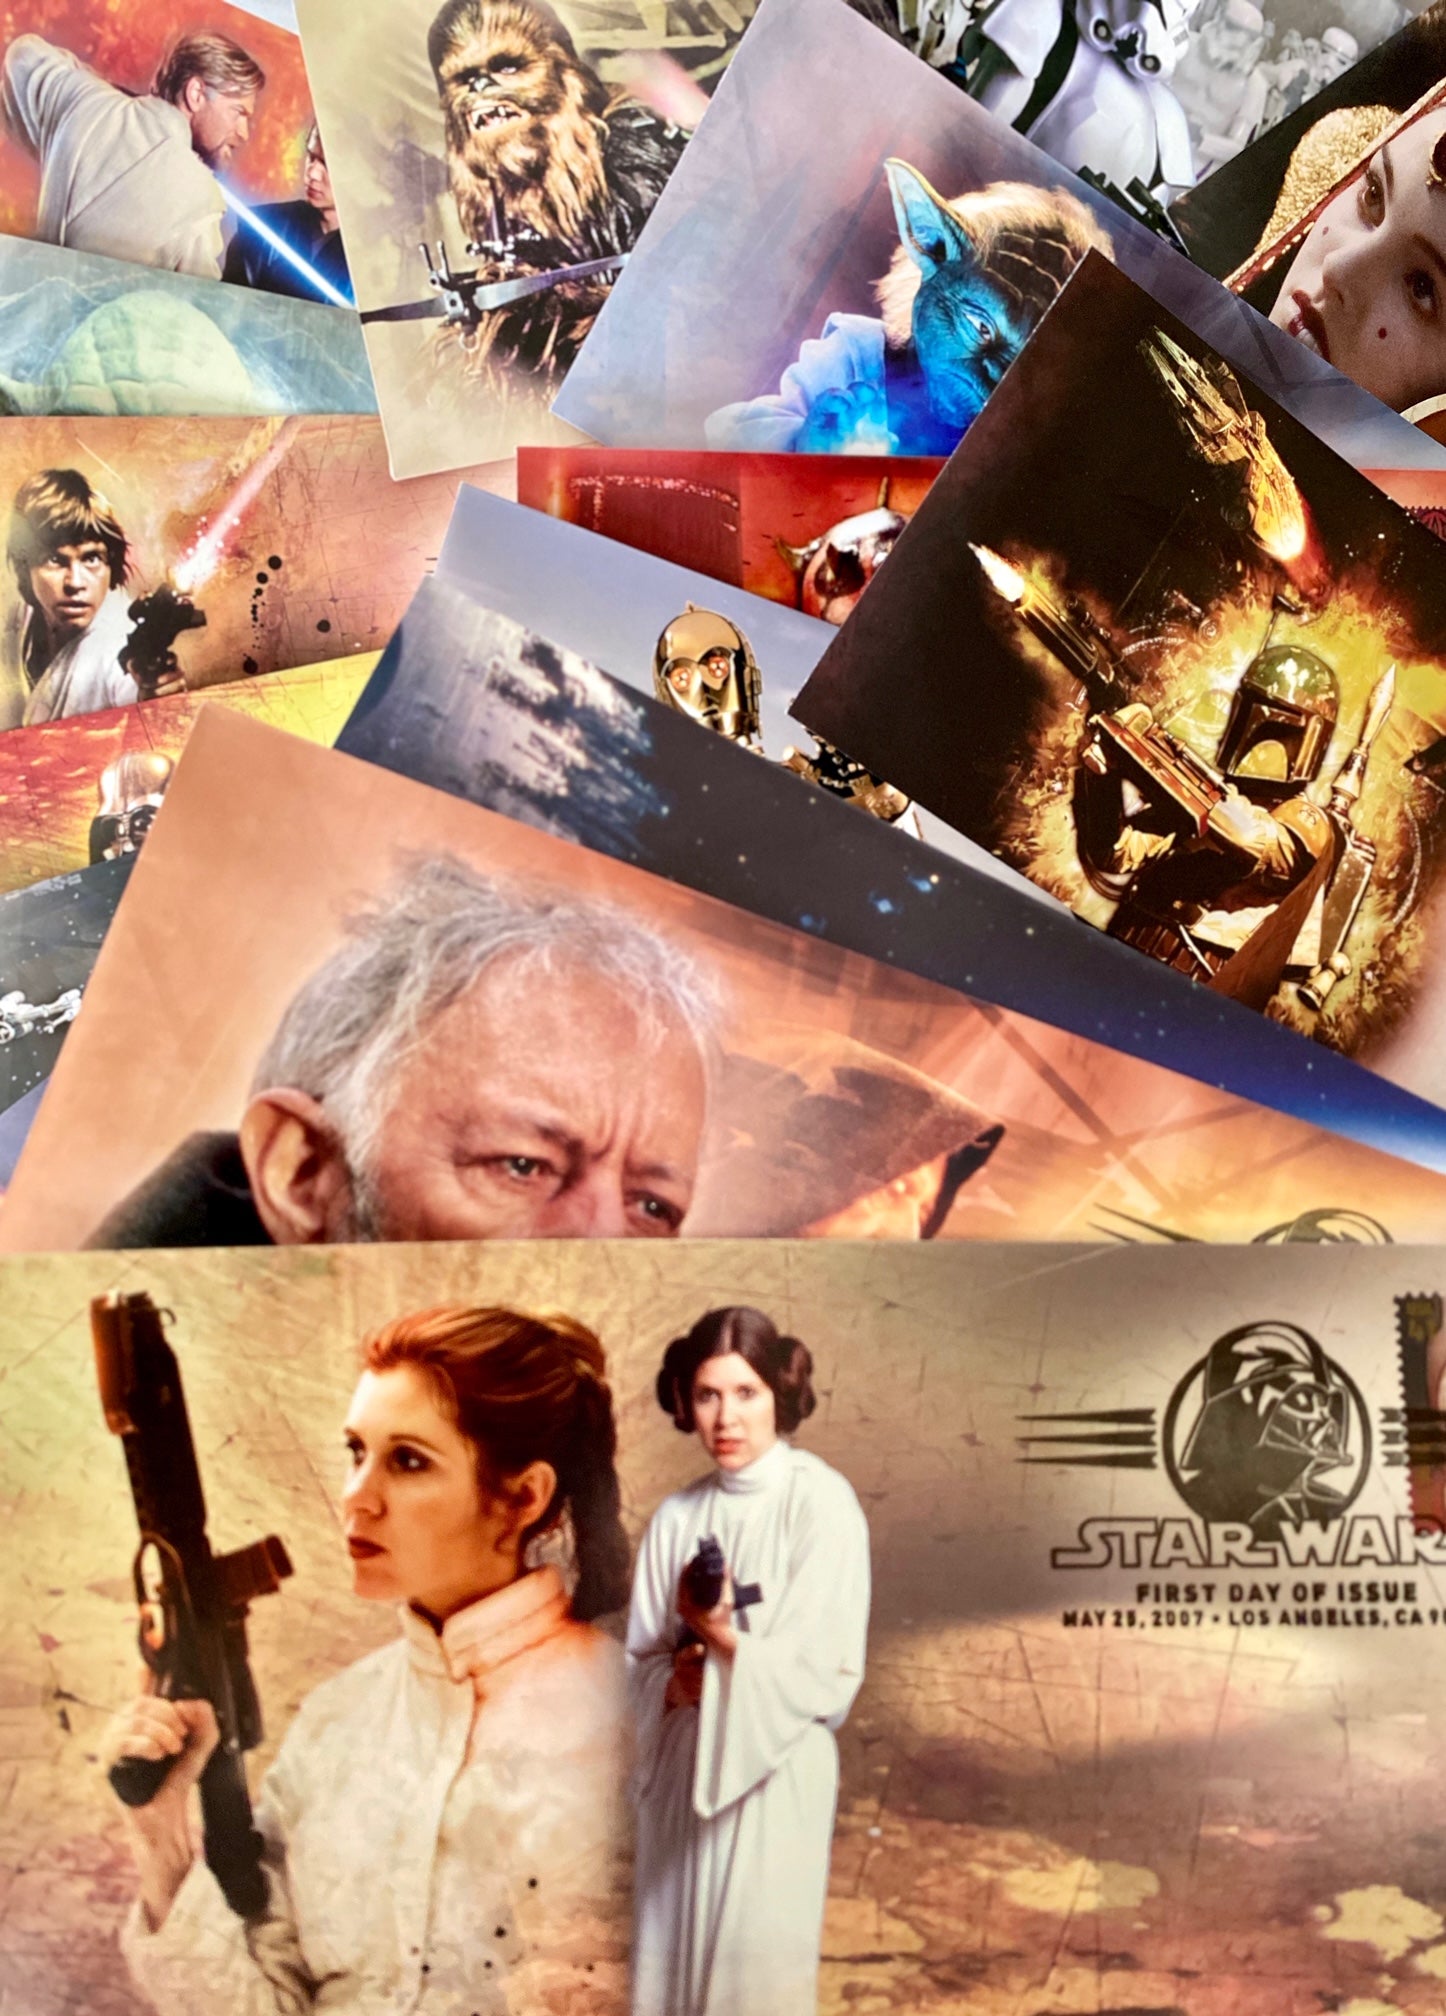 SET OF 17 STAR WARS COMMEMORATIVE  ENVELOPES WITH CHARACTER STAMPS FROM 2007